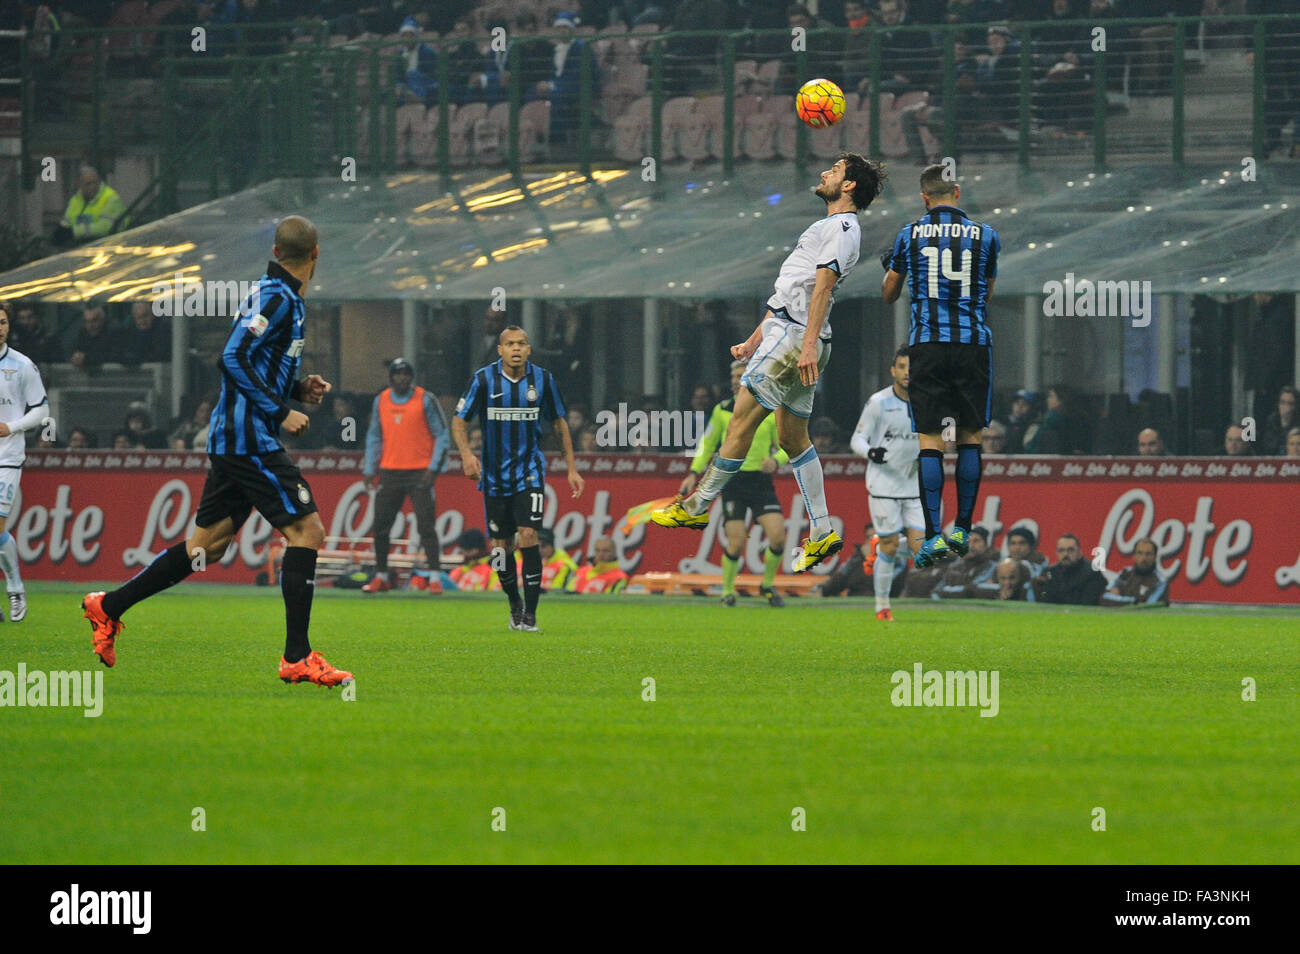 Milan, Italy. Decembe 20th, 2015. Stefan Radu of SS Lazio and Martín Montoya of FC Inter in action during the Italian Serie A League soccer match between Inter Milan and SS Lazio at San Siro Stadium in Milan, Italy. Credit:  Gaetano Piazzolla/Alamy Live News Stock Photo